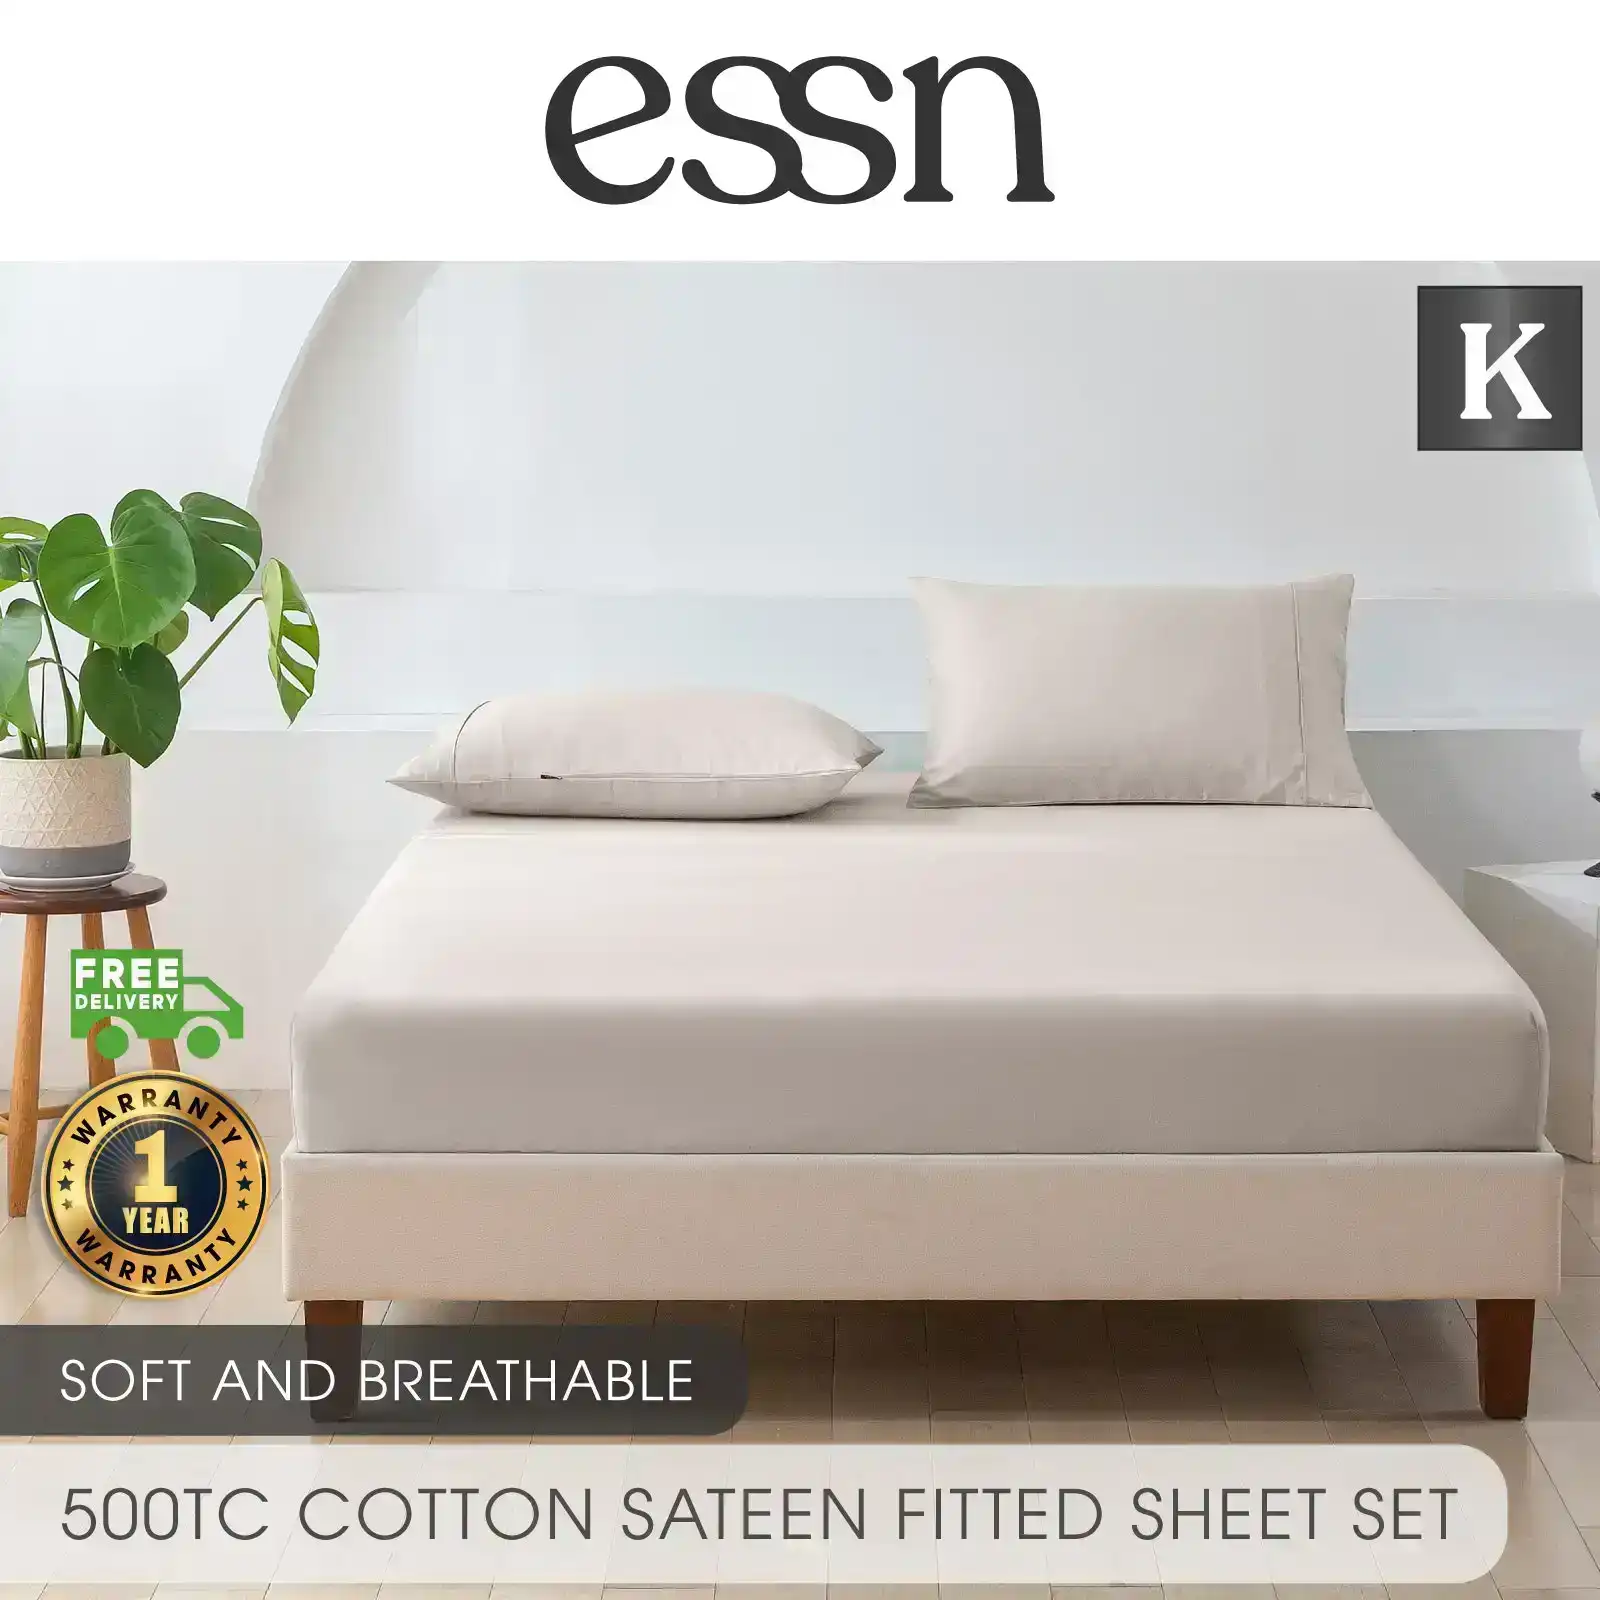 ESSN 500TC Cotton Sateen Fitted Sheet Set Stone King Bed